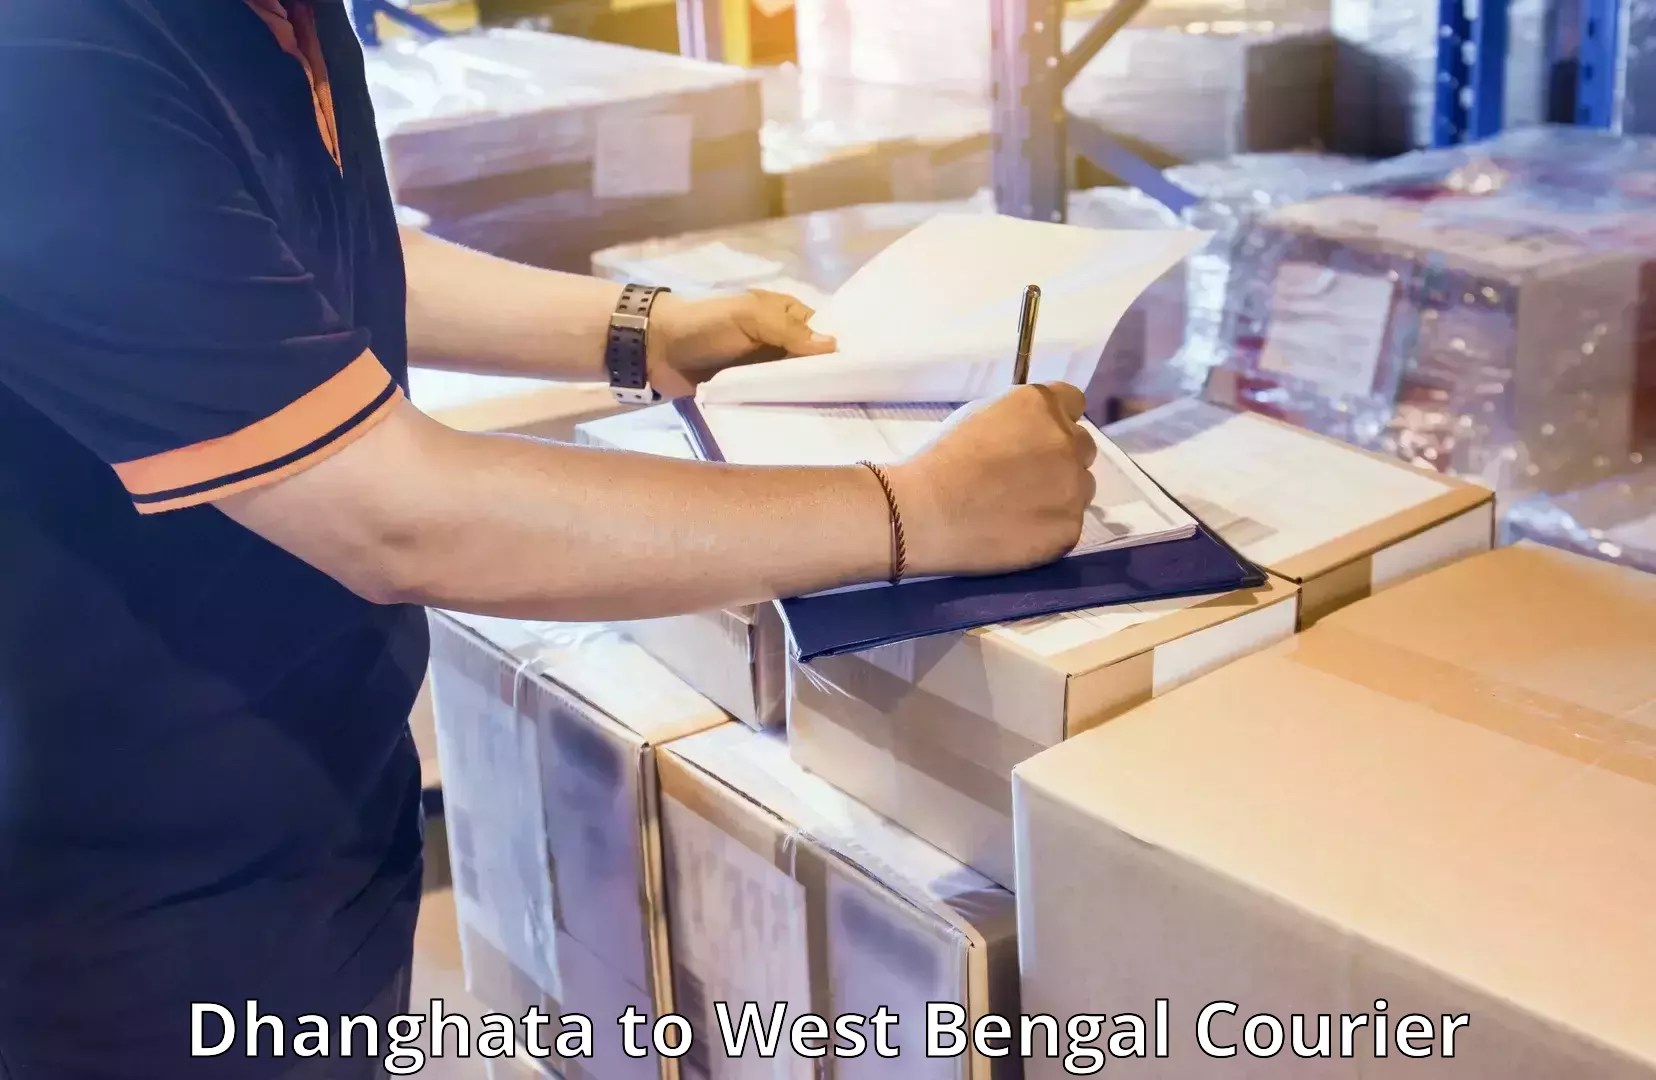 Luggage transfer service Dhanghata to West Bengal